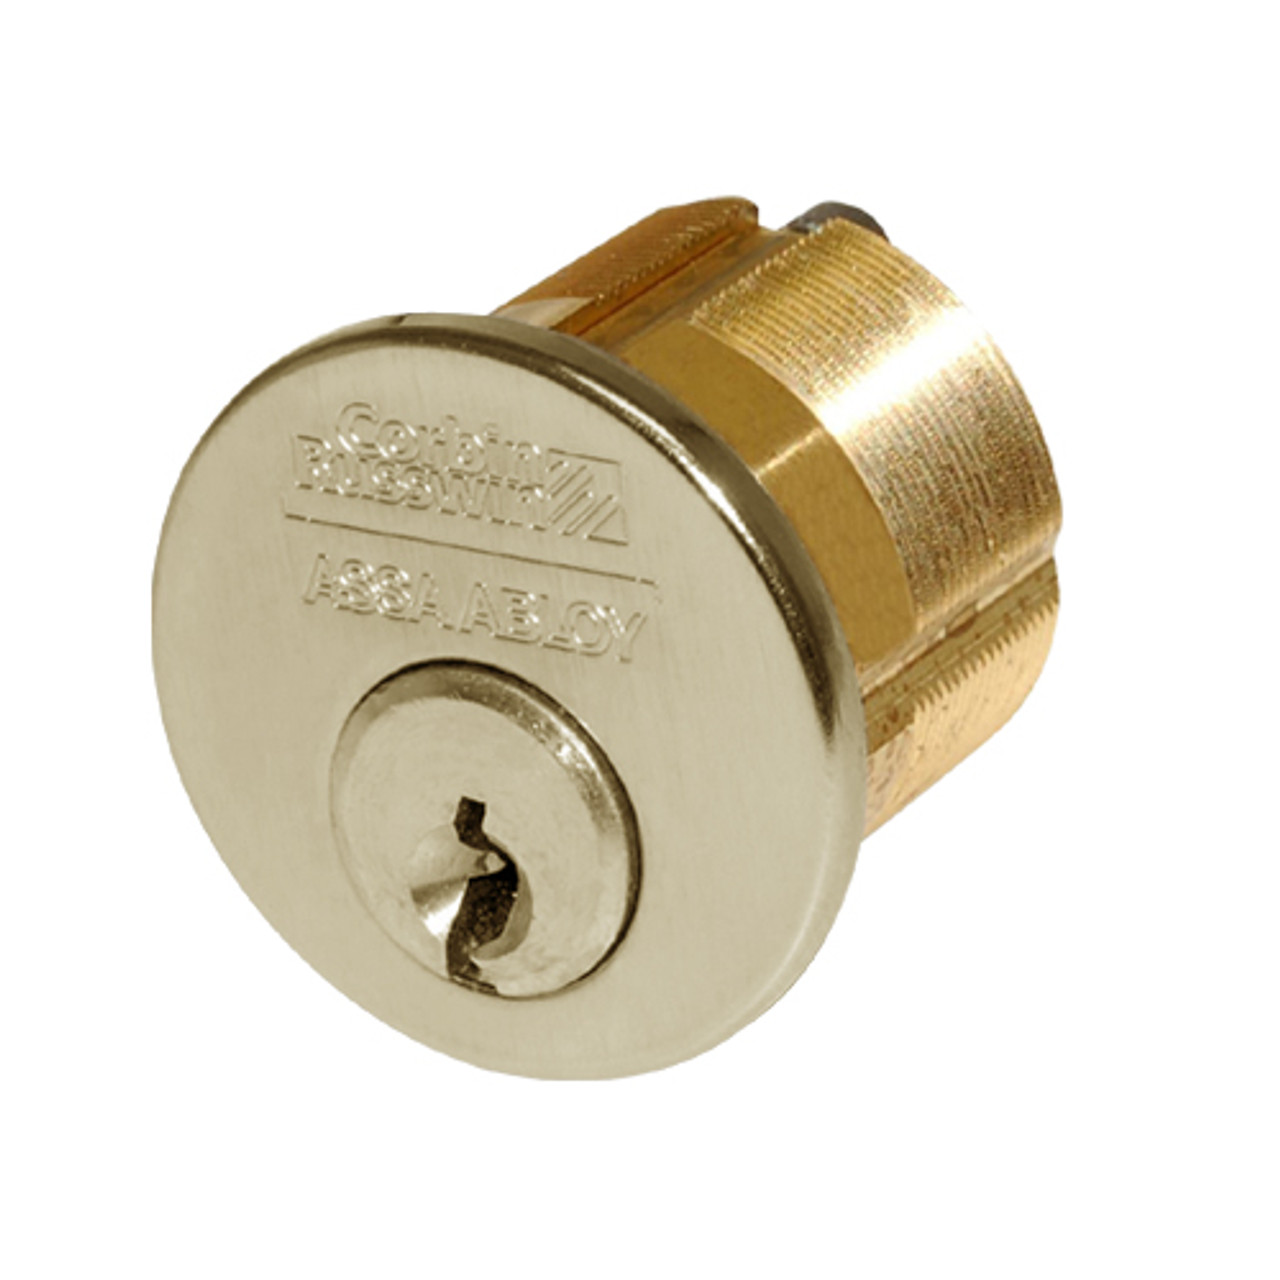 CR1000-138-A01-6-59A2-606 Corbin Conventional Mortise Cylinder for Mortise Lock and DL3000 Deadlocks with Cloverleaf Cam in Satin Brass Finish